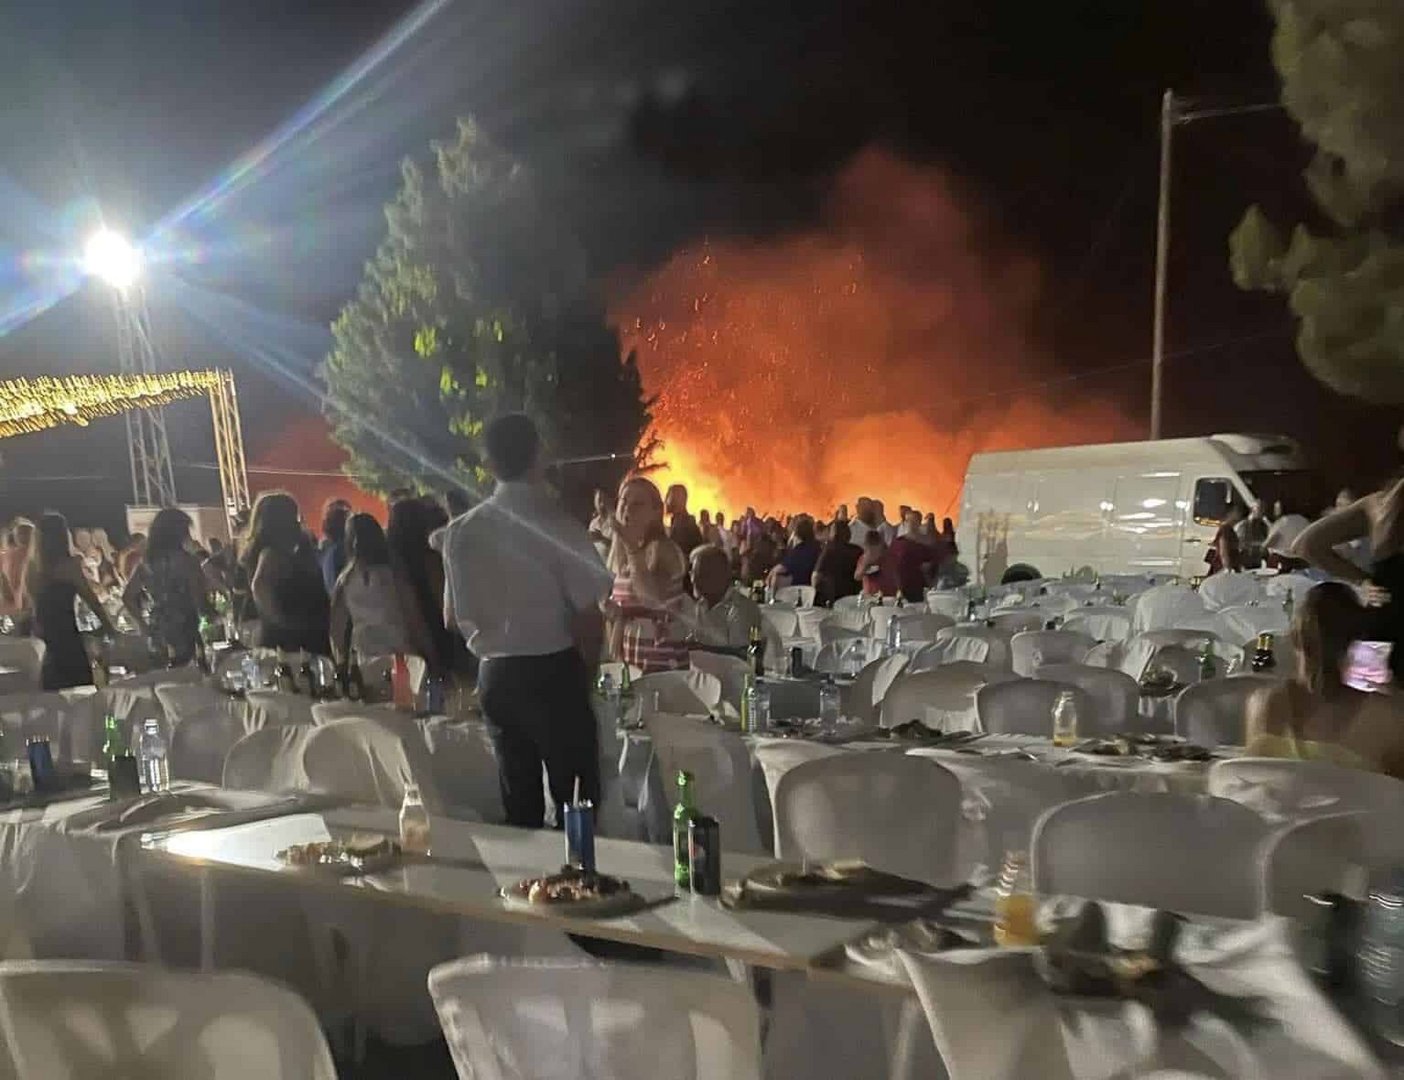 image Fireworks that started wedding fire were illegal